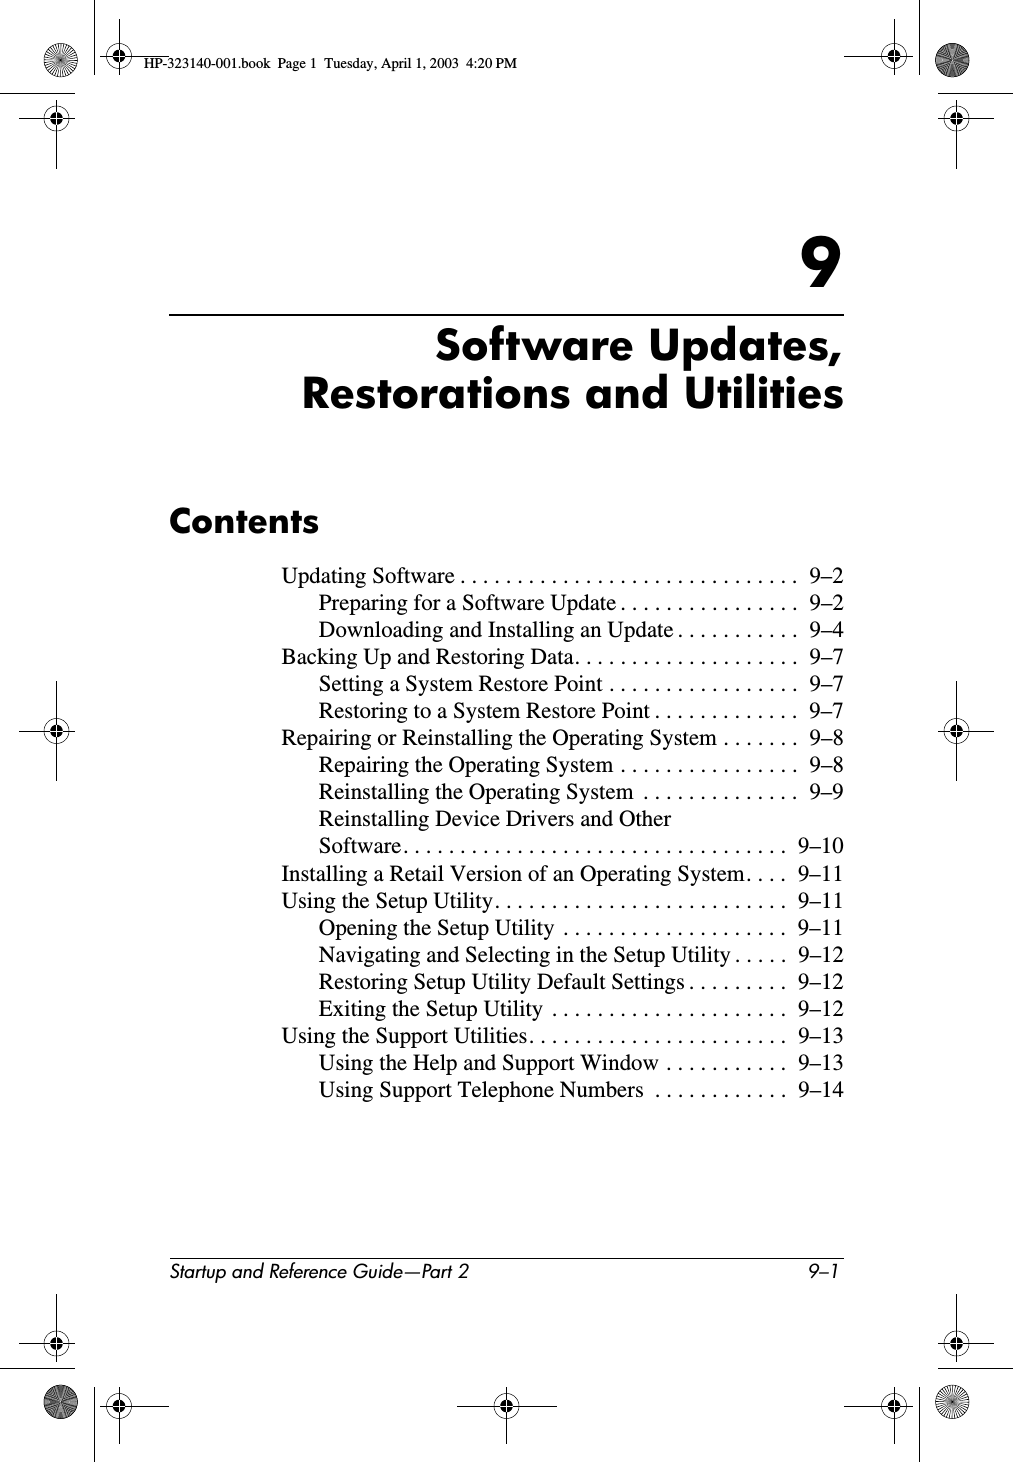 Startup and Reference Guide—Part 2 9–19Software Updates,Restorations and UtilitiesContentsUpdating Software . . . . . . . . . . . . . . . . . . . . . . . . . . . . . .  9–2Preparing for a Software Update . . . . . . . . . . . . . . . .  9–2Downloading and Installing an Update . . . . . . . . . . .  9–4Backing Up and Restoring Data. . . . . . . . . . . . . . . . . . . .  9–7Setting a System Restore Point . . . . . . . . . . . . . . . . .  9–7Restoring to a System Restore Point . . . . . . . . . . . . .  9–7Repairing or Reinstalling the Operating System . . . . . . .  9–8Repairing the Operating System . . . . . . . . . . . . . . . .  9–8Reinstalling the Operating System  . . . . . . . . . . . . . .  9–9Reinstalling Device Drivers and Other Software. . . . . . . . . . . . . . . . . . . . . . . . . . . . . . . . . .  9–10Installing a Retail Version of an Operating System. . . .  9–11Using the Setup Utility. . . . . . . . . . . . . . . . . . . . . . . . . .  9–11Opening the Setup Utility  . . . . . . . . . . . . . . . . . . . .  9–11Navigating and Selecting in the Setup Utility . . . . .  9–12Restoring Setup Utility Default Settings . . . . . . . . .  9–12Exiting the Setup Utility  . . . . . . . . . . . . . . . . . . . . .  9–12Using the Support Utilities. . . . . . . . . . . . . . . . . . . . . . .  9–13Using the Help and Support Window . . . . . . . . . . .  9–13Using Support Telephone Numbers  . . . . . . . . . . . .  9–14HP-323140-001.book  Page 1  Tuesday, April 1, 2003  4:20 PM